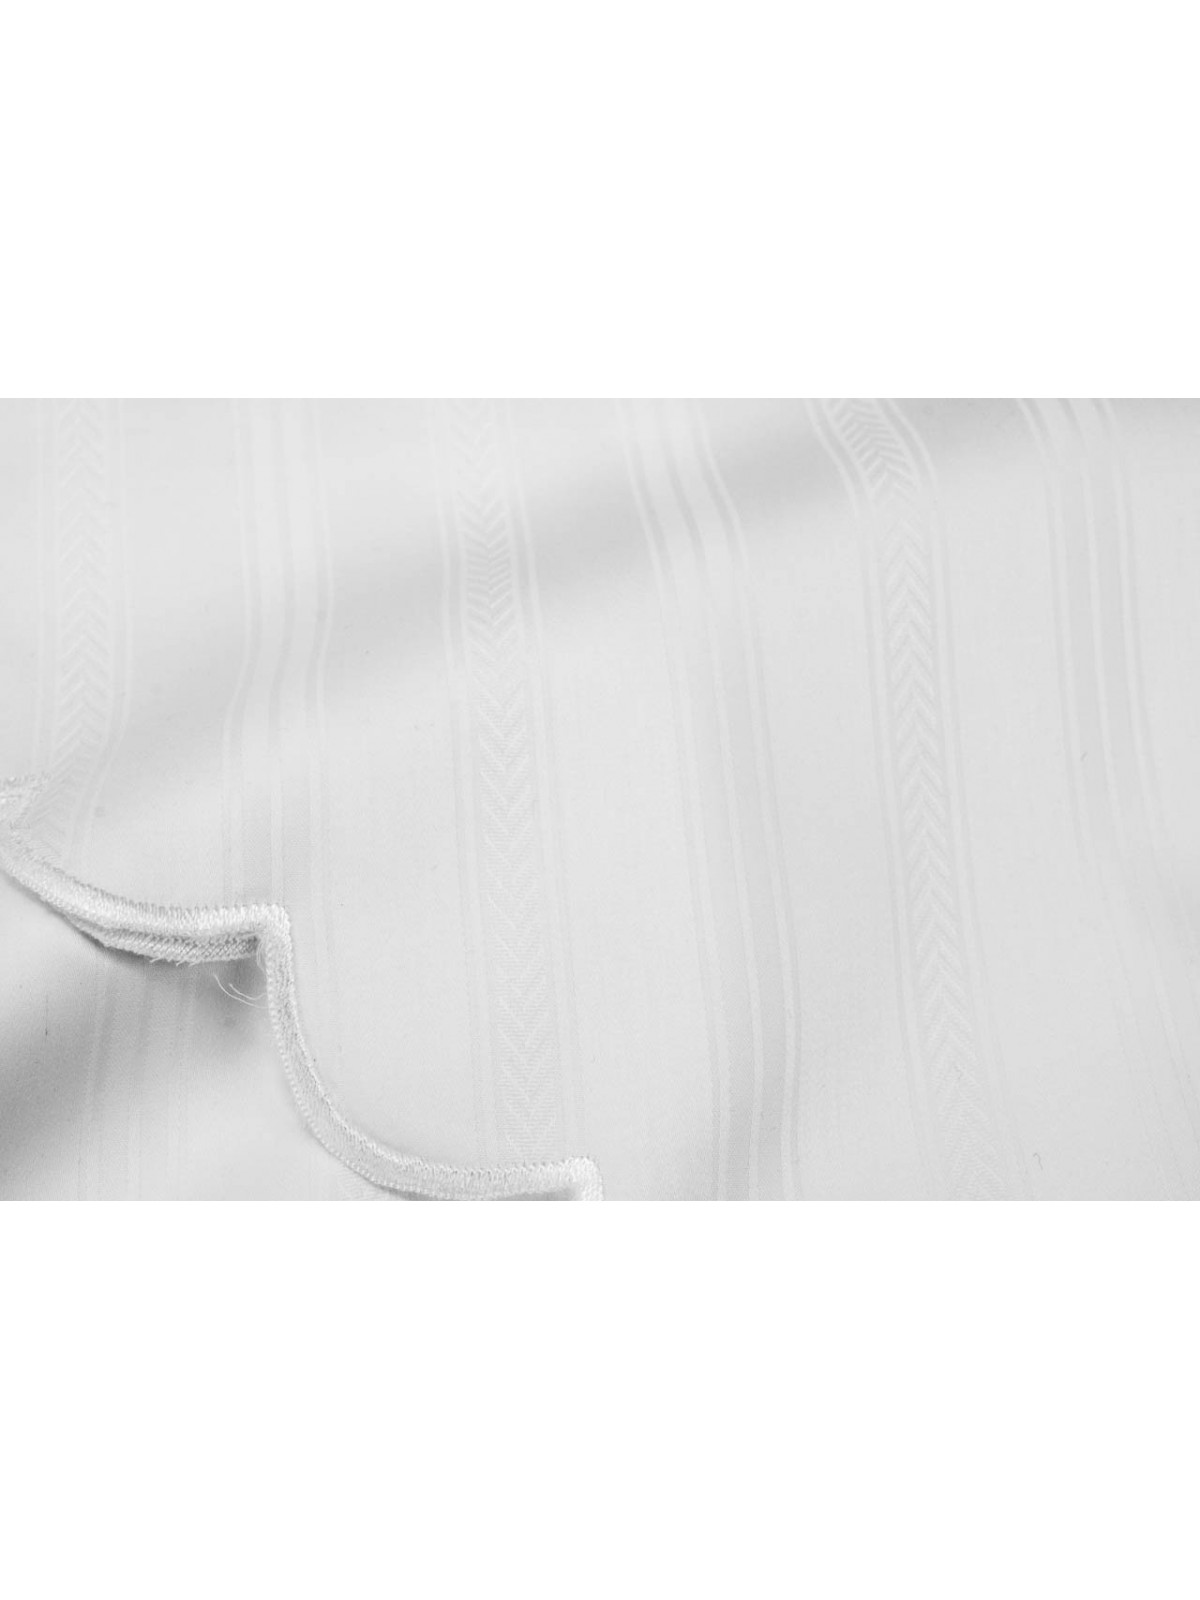 The bedspread's Lightweight Double Satin Cotton White Jacquard Pin 260x260 ref. Rebrodé Embroidered